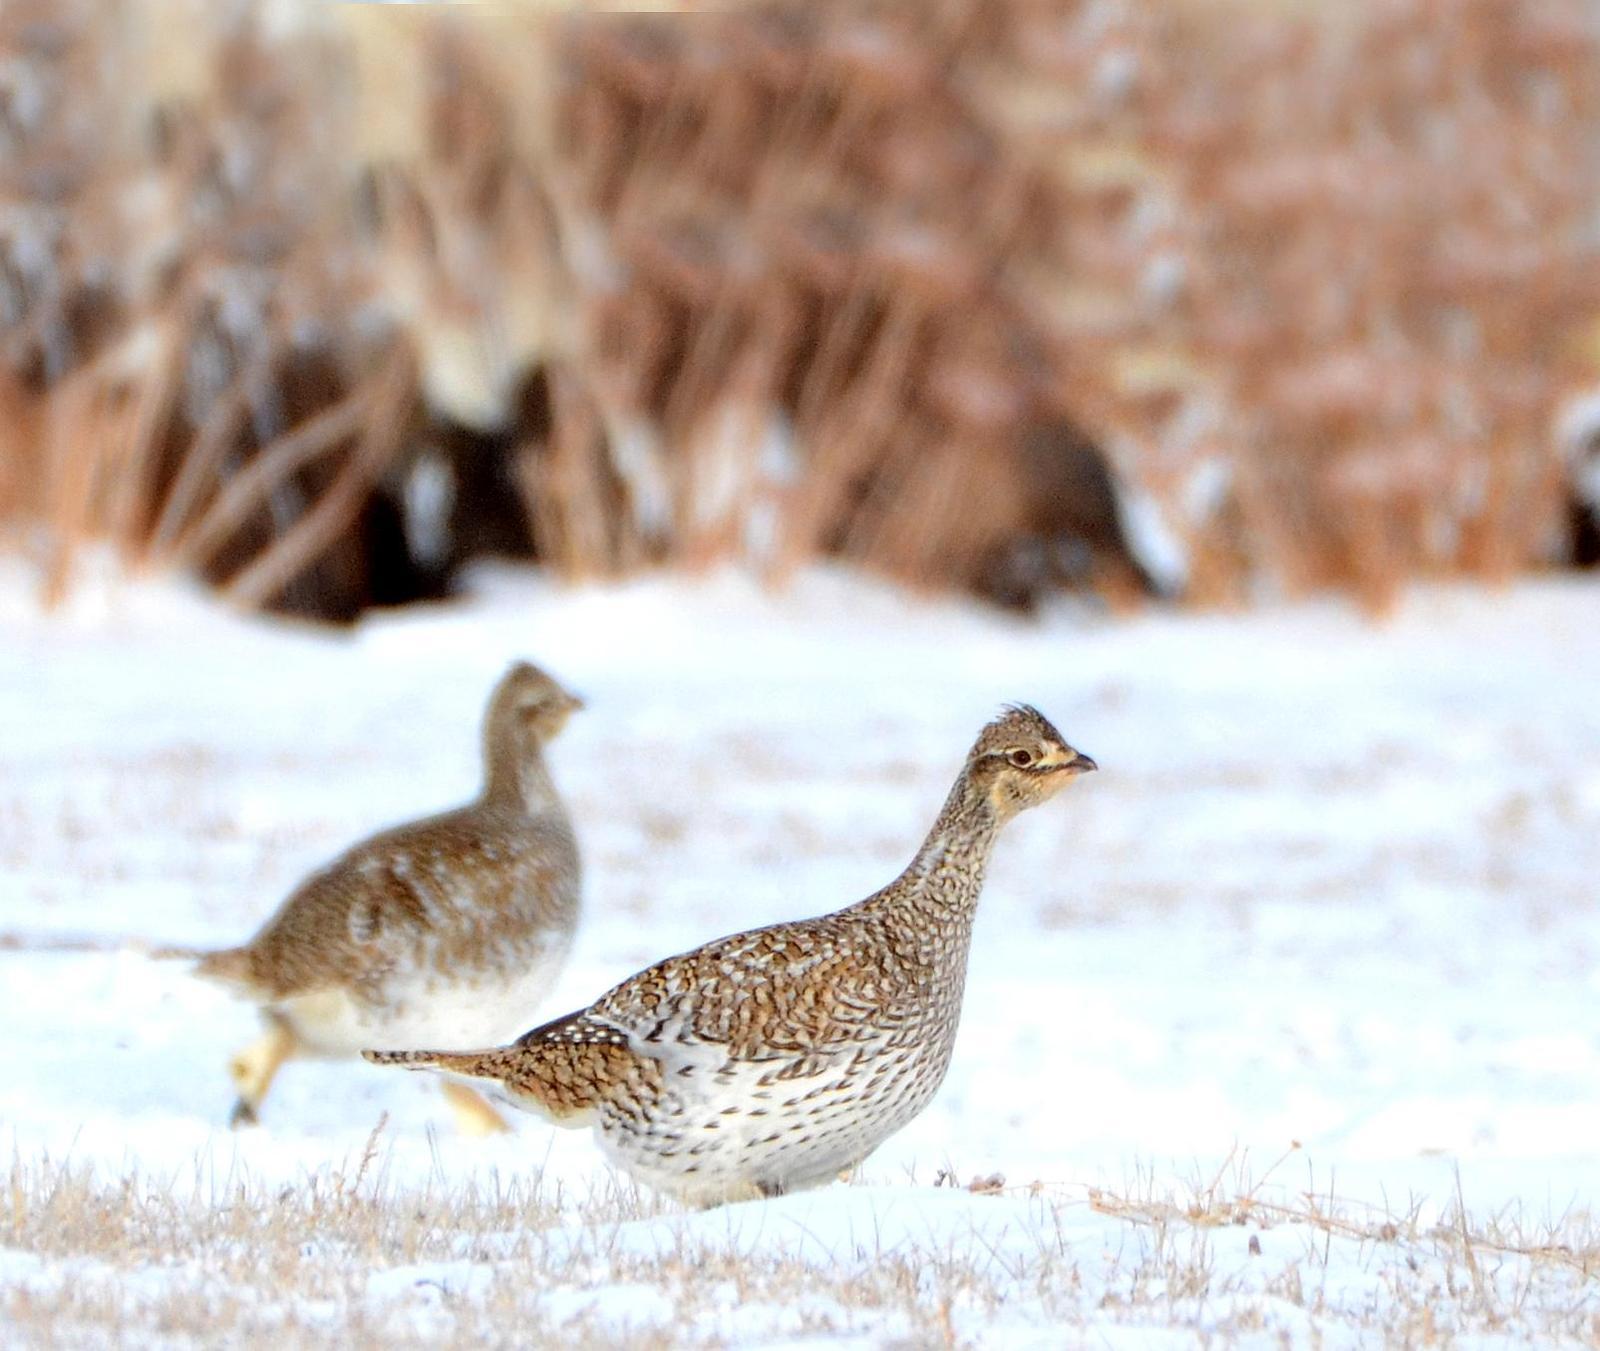 Sharp-tailed Grouse Photo by Steven Mlodinow